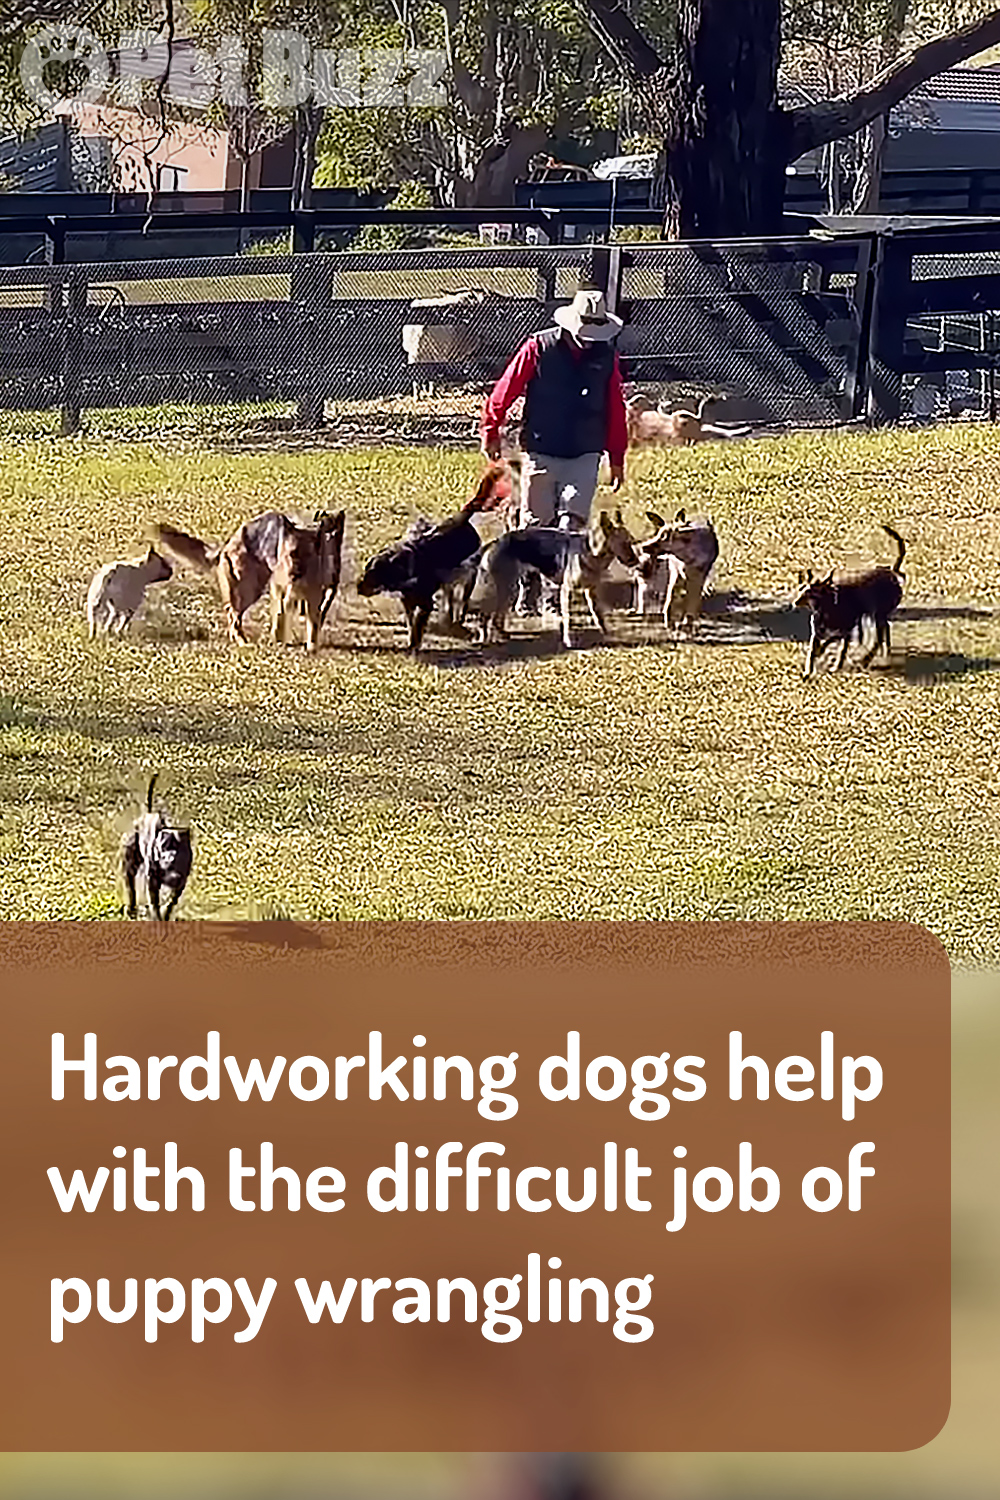 Hardworking dogs help with the difficult job of puppy wrangling